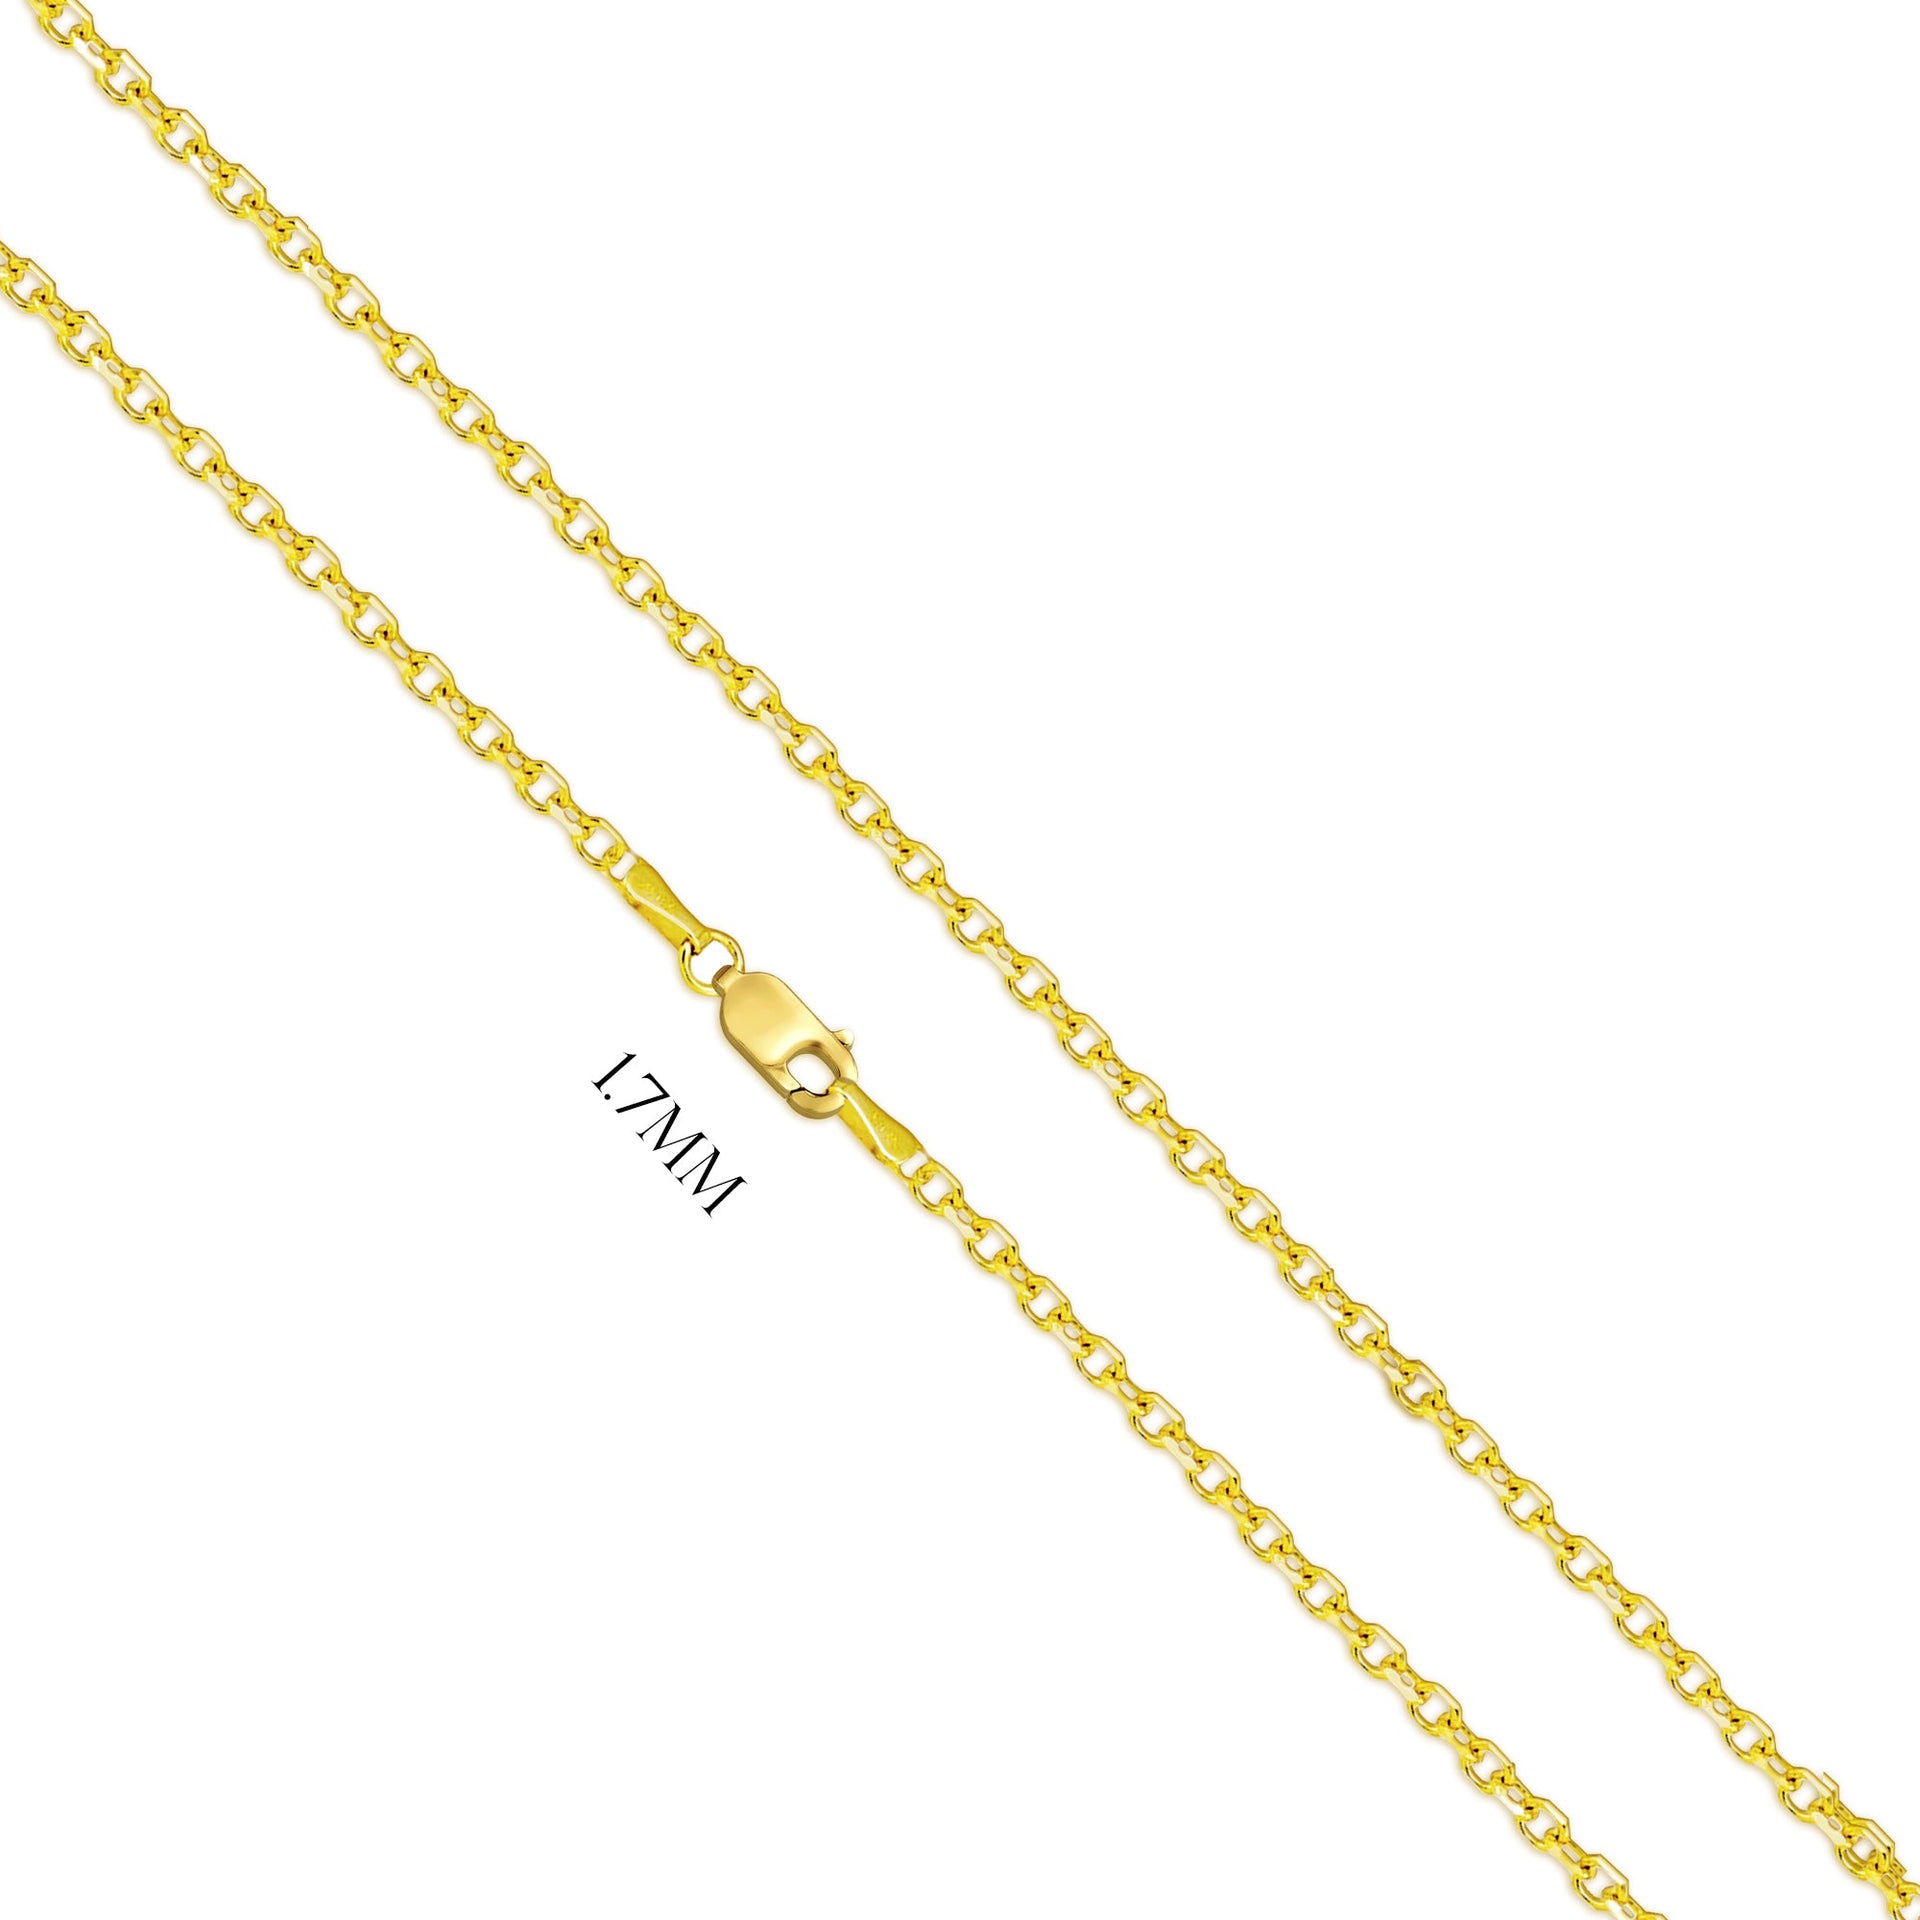 Solid 14K Yellow Gold Diamond Cut Cable Chain Necklace, Sizes 1.5mm to 3.0mm - US Jewels